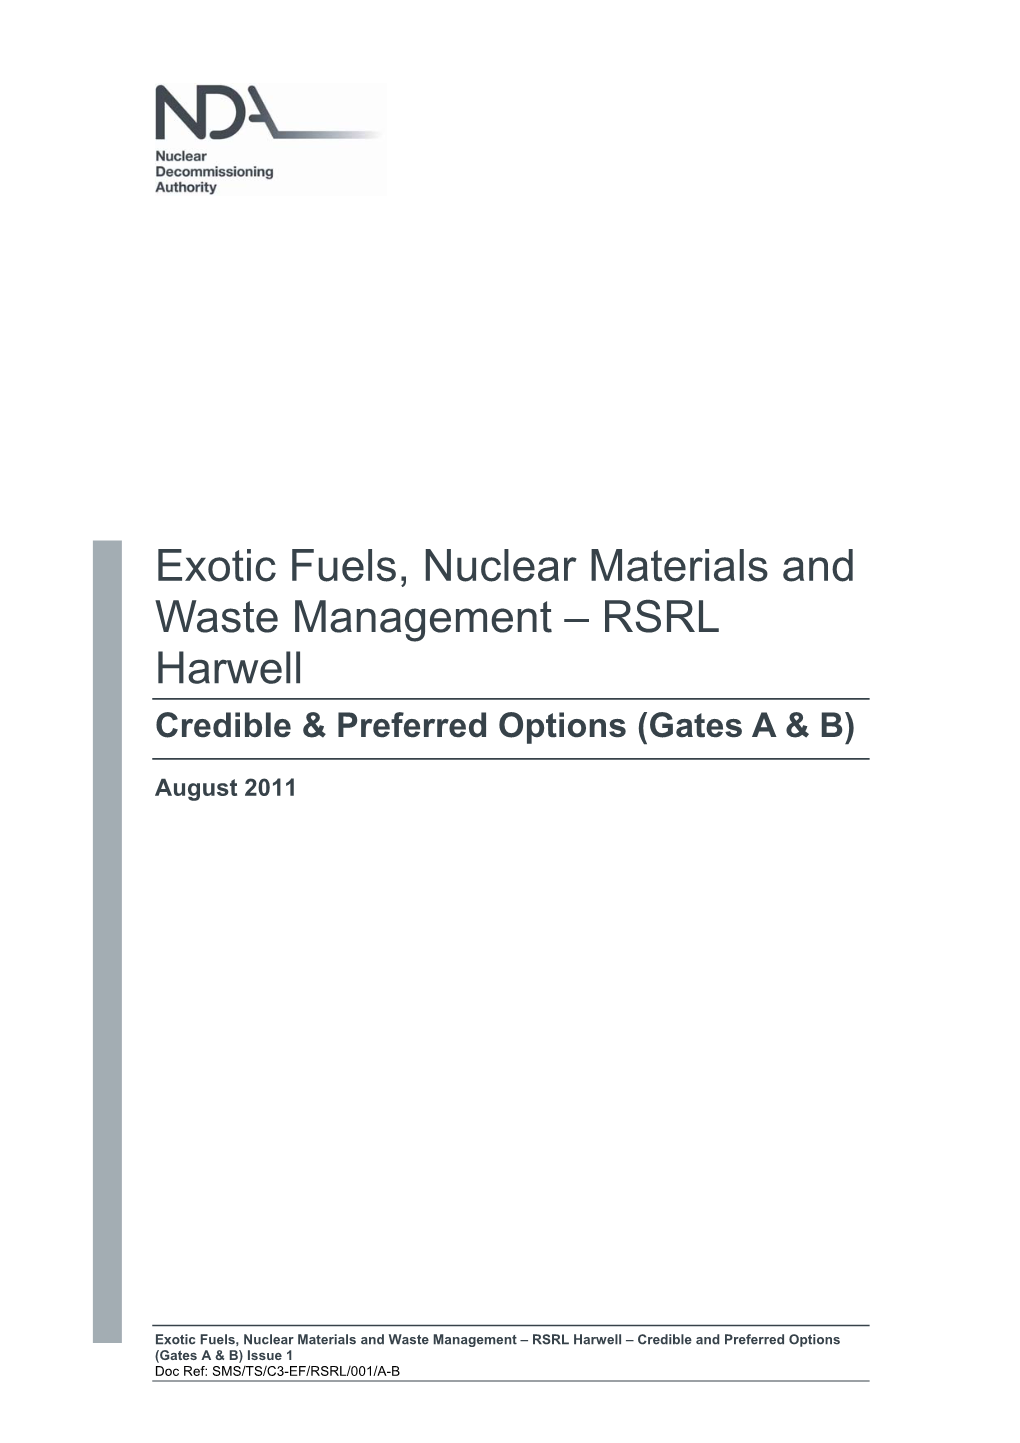 Nuclear Materials and Waste Management – RSRL Harwell Credible & Preferred Options (Gates a & B)